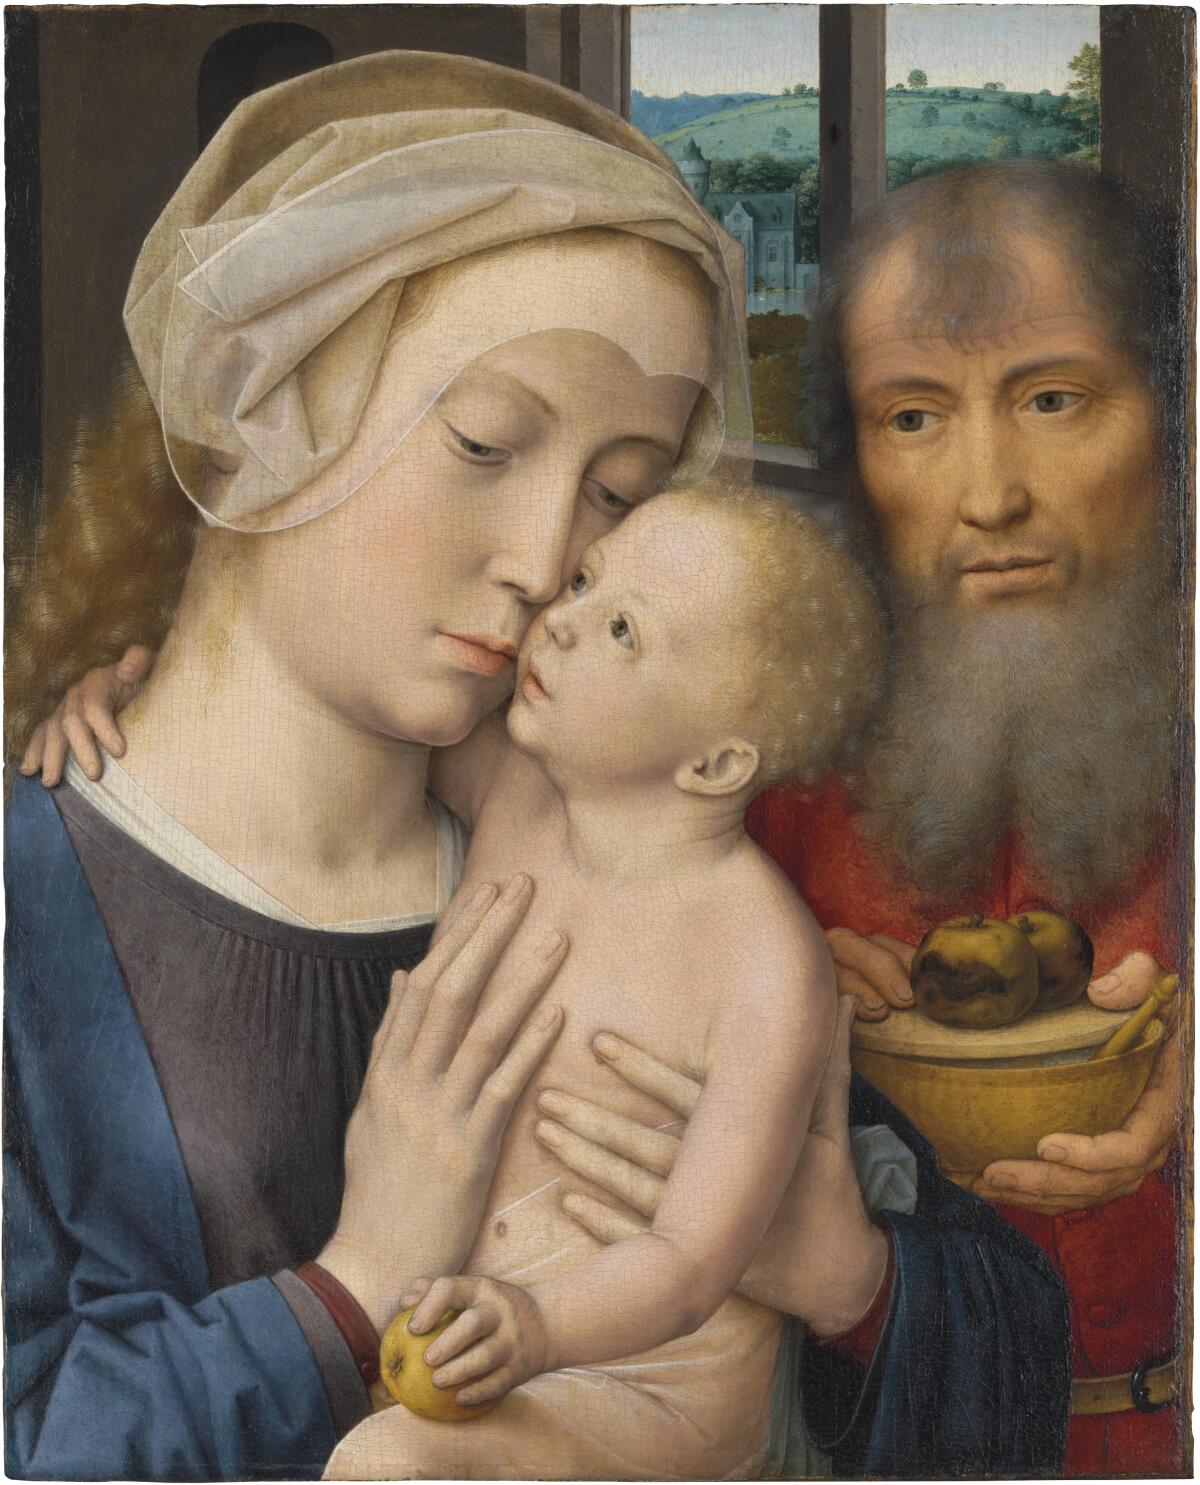 A vertical canvas shows the Virgin Mary holding an infant who clutches an apple as Joseph approaches with a bowl.